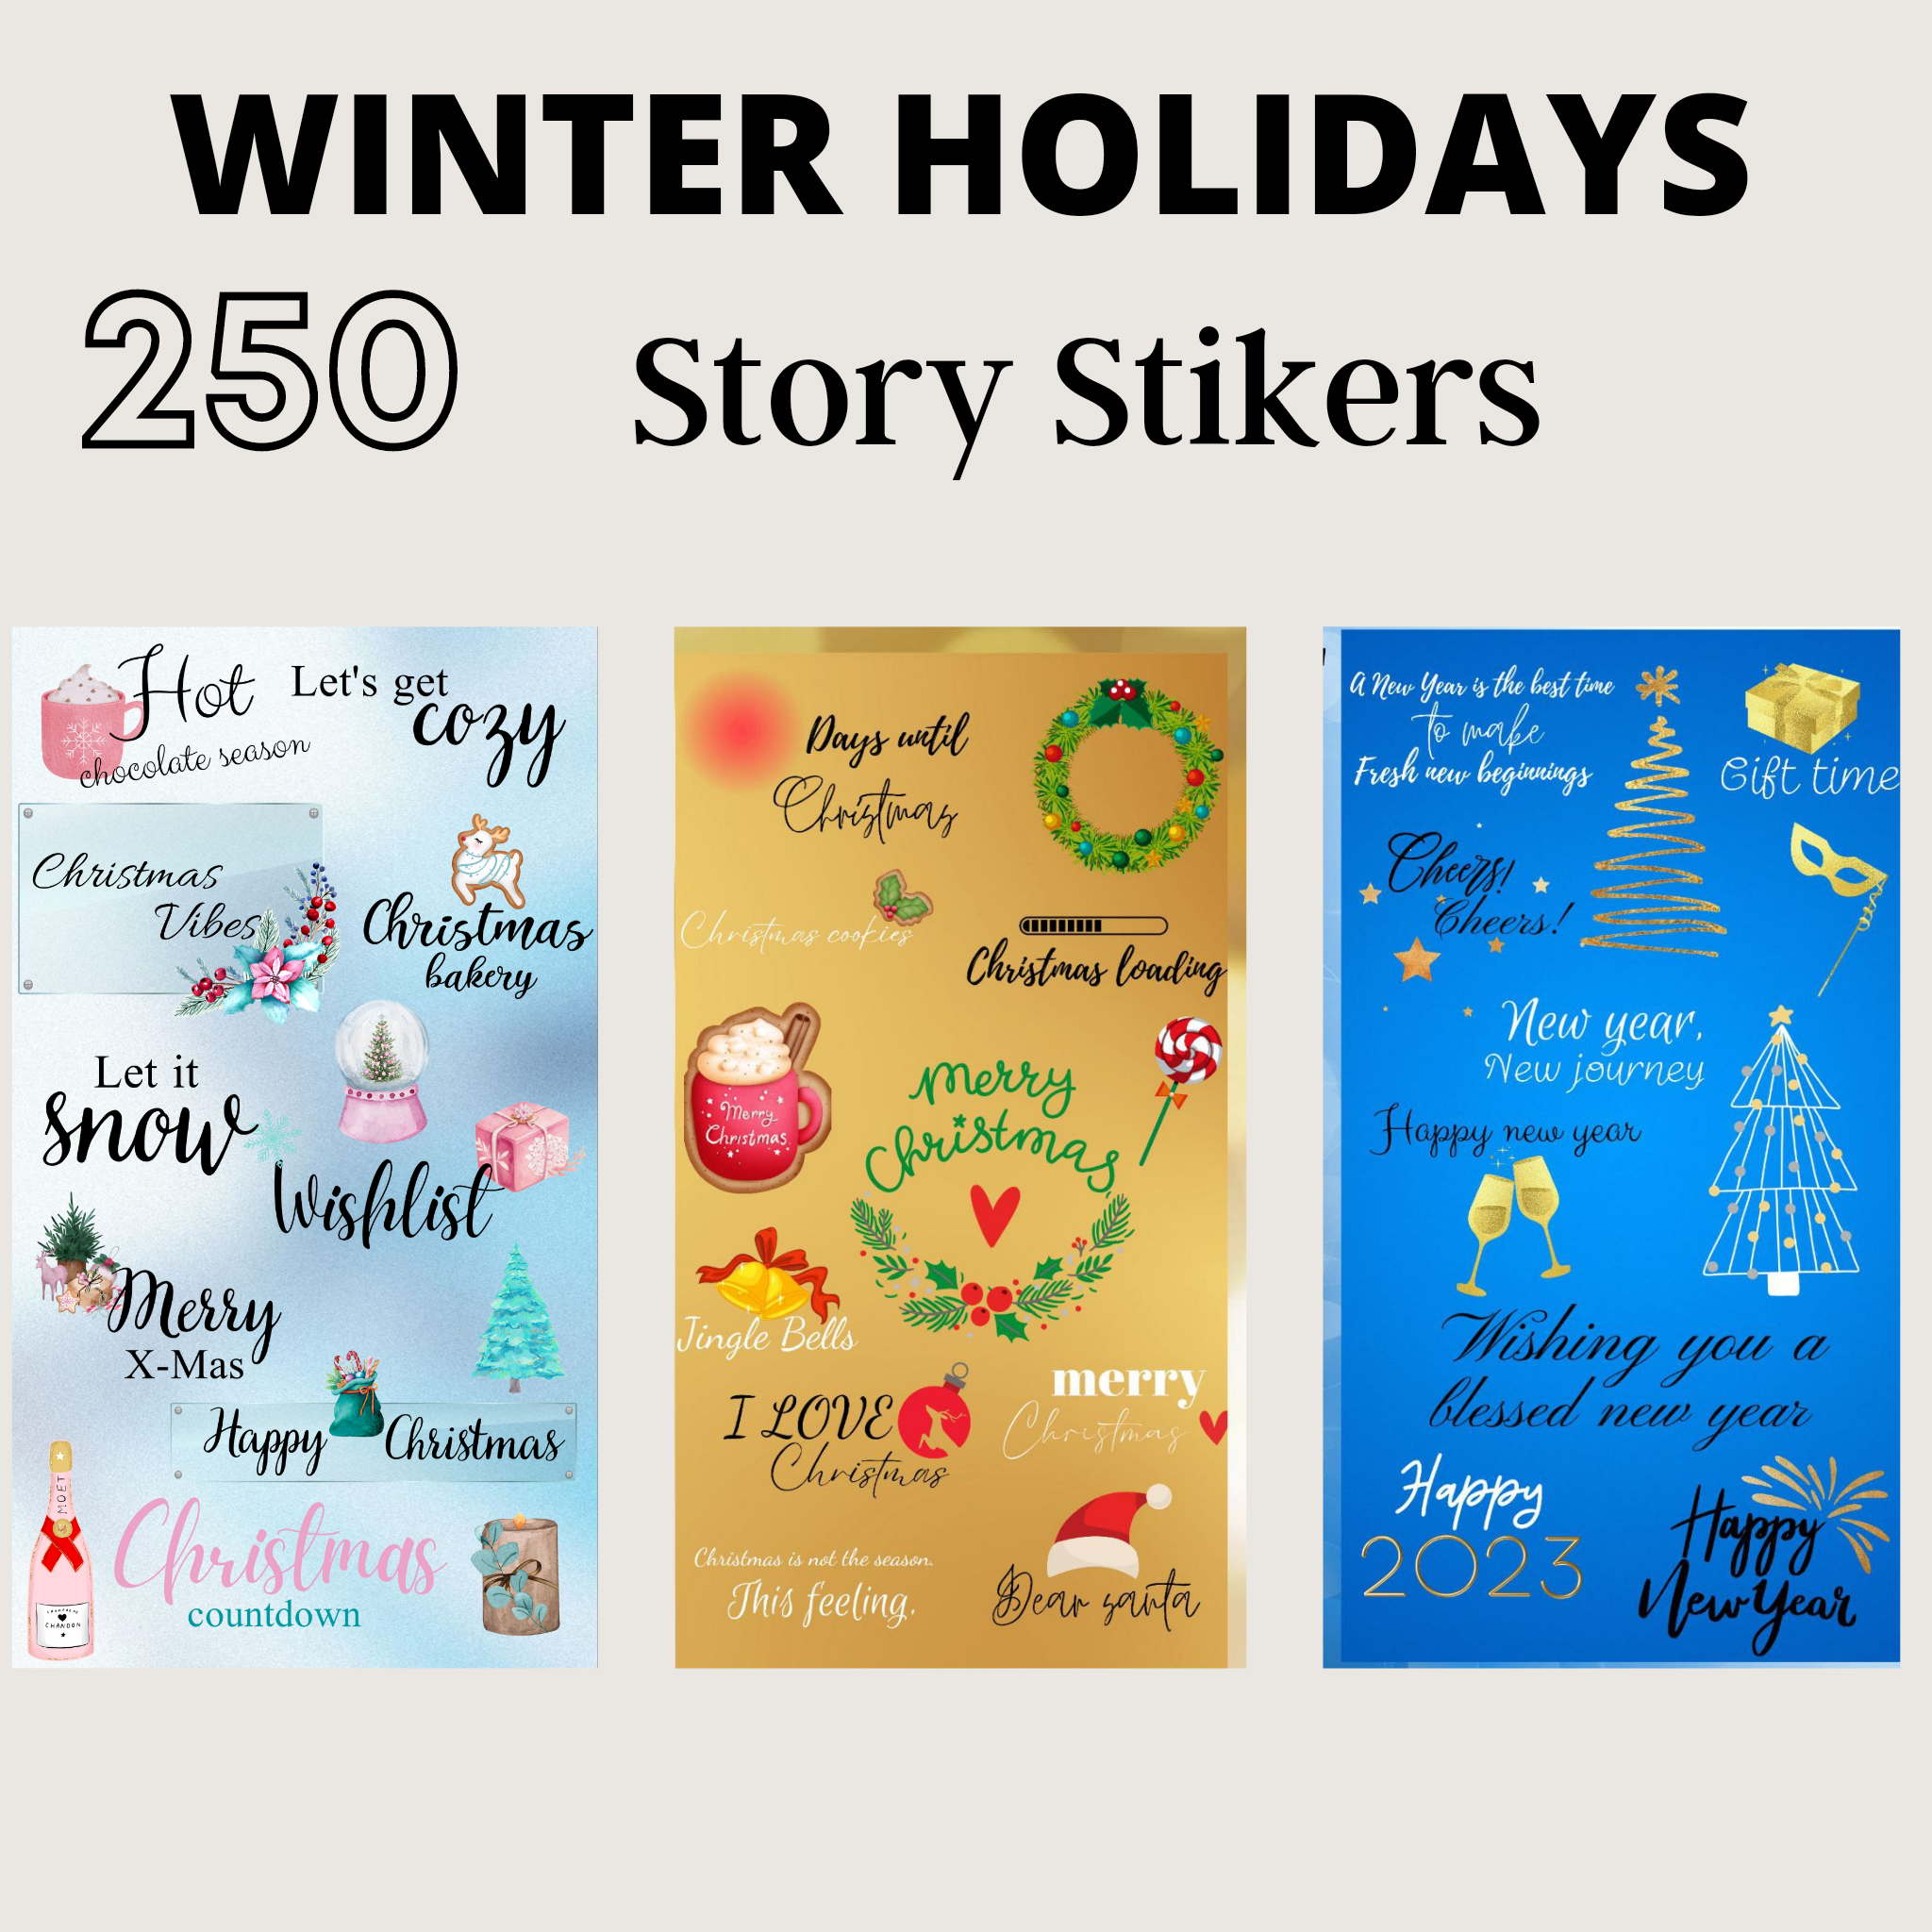 Best winter holidays instagram story stickers for stories